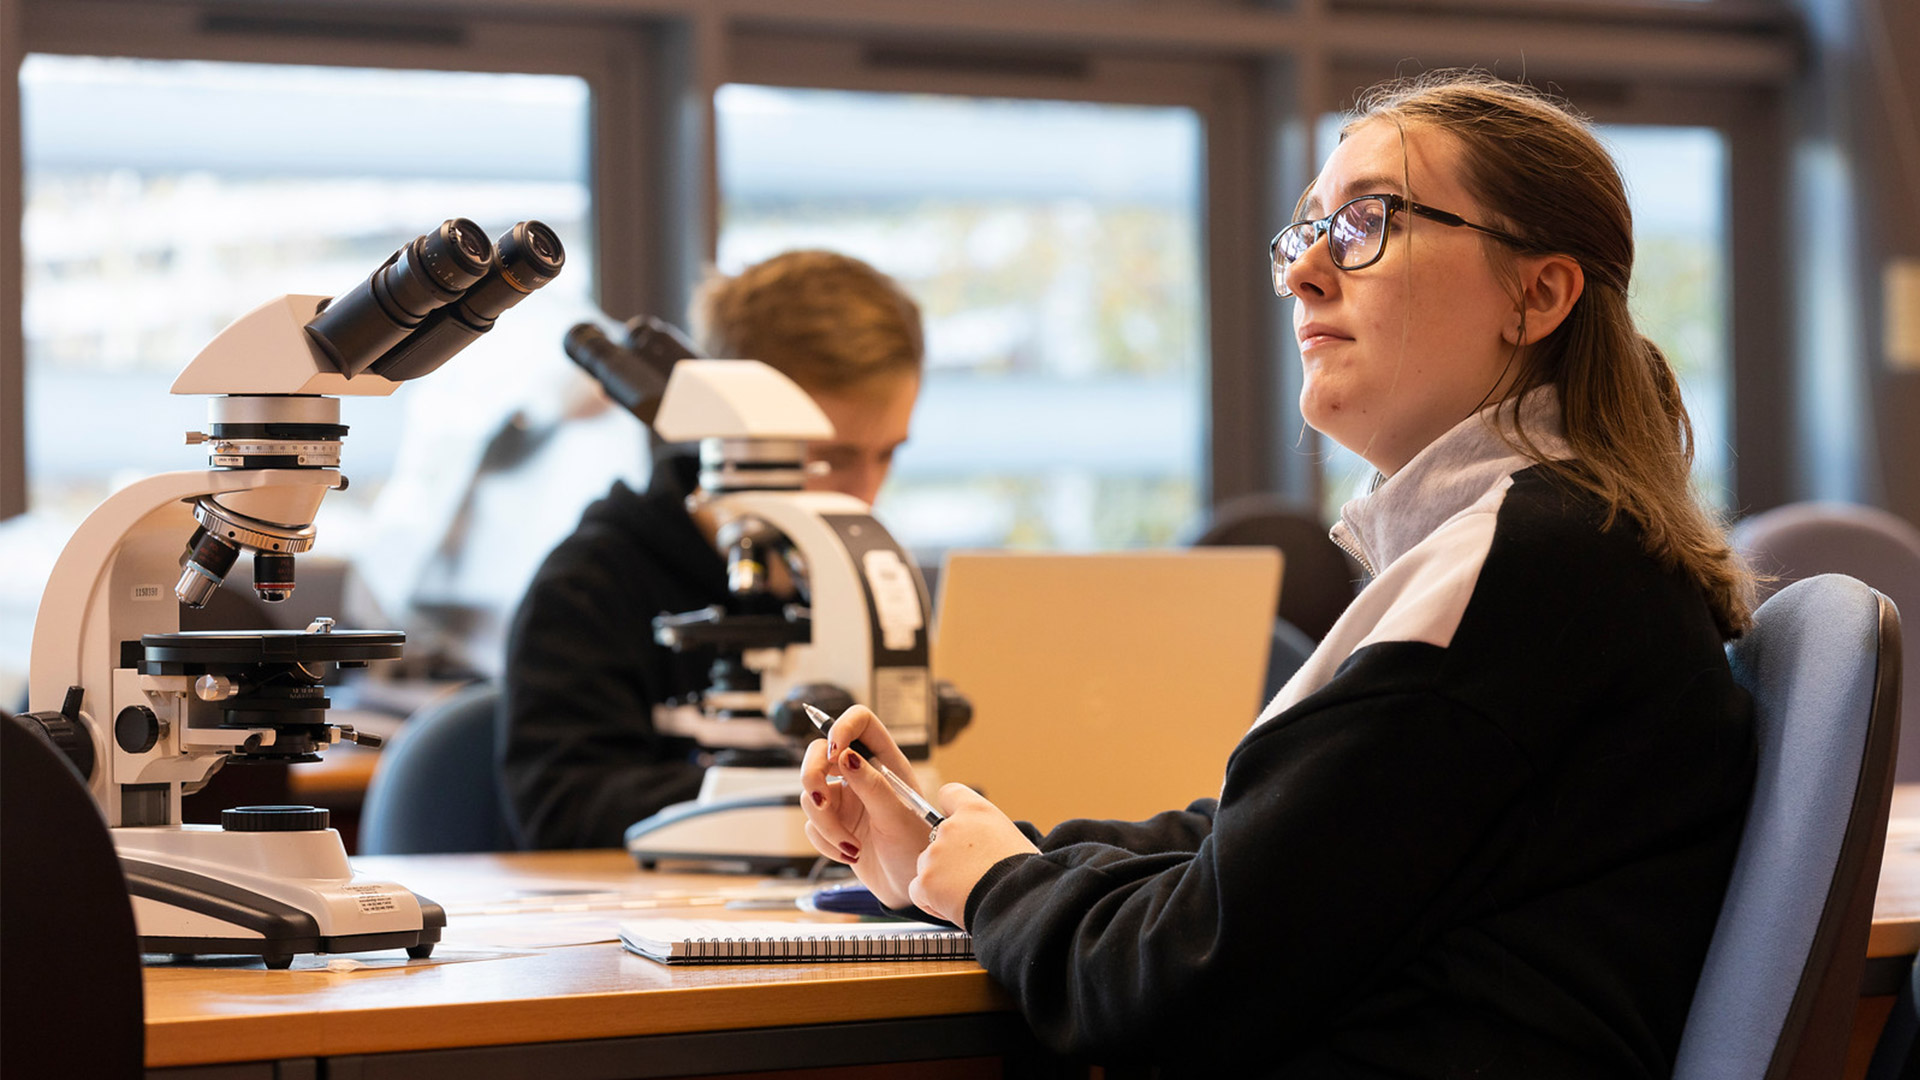 Geography student using microscopes and referencing a map in the lab